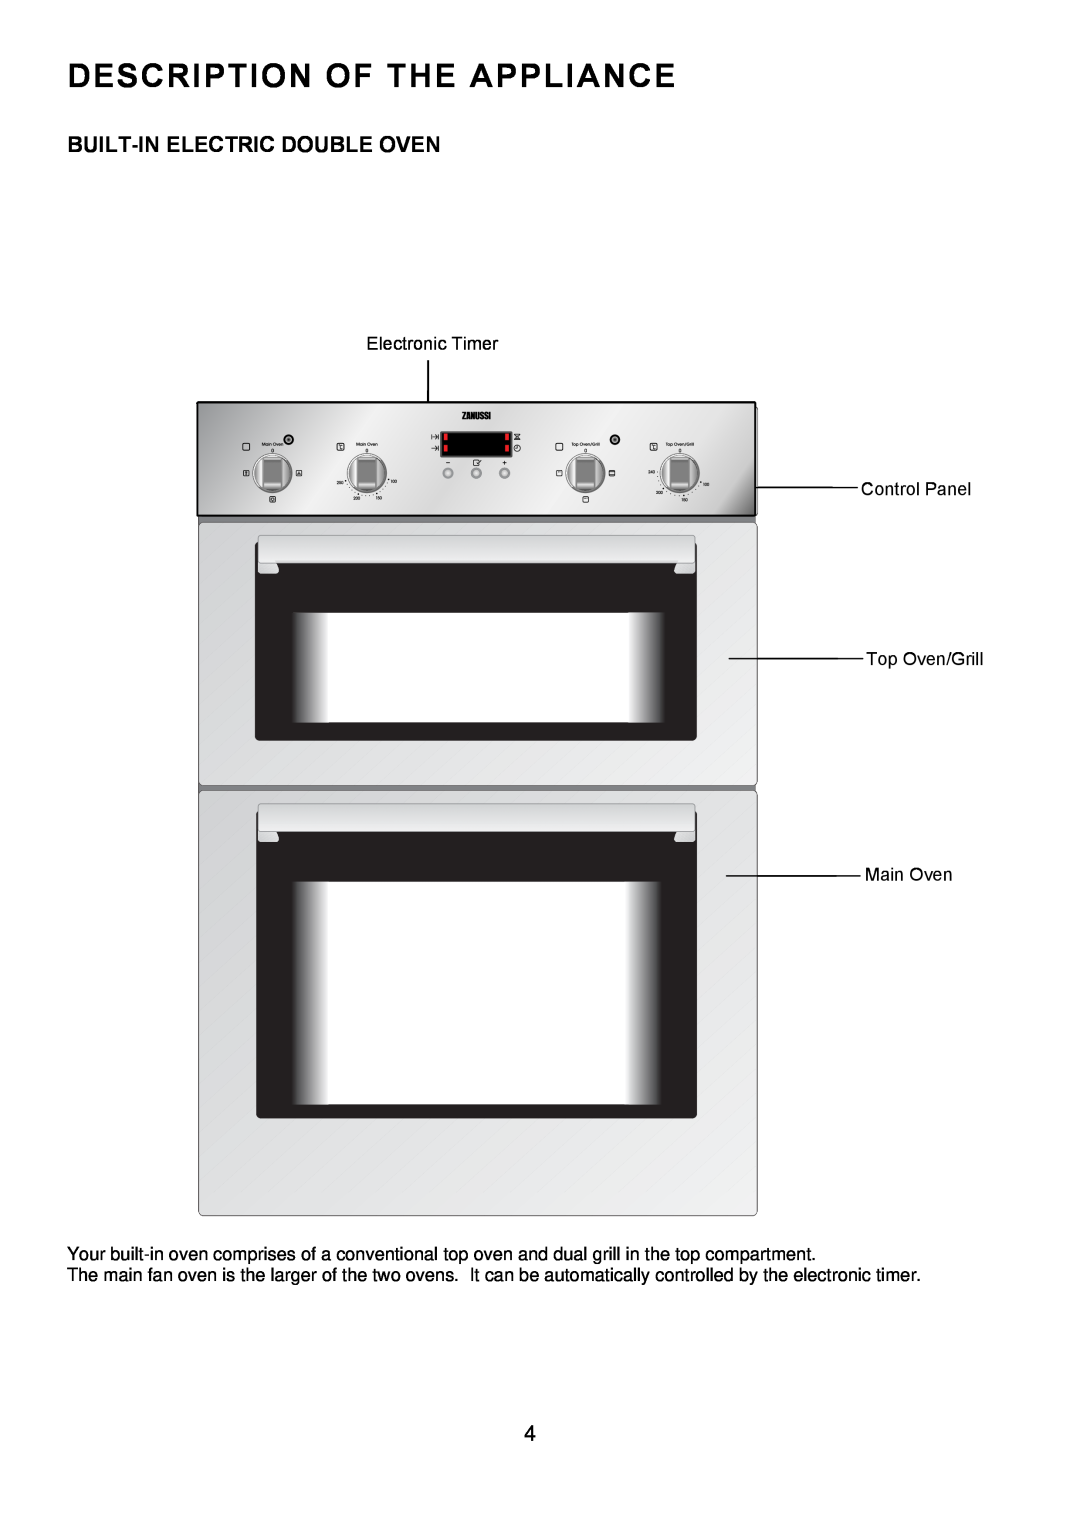 Zanussi ZOD 330 manual Description Of The Appliance, Built-Inelectric Double Oven 